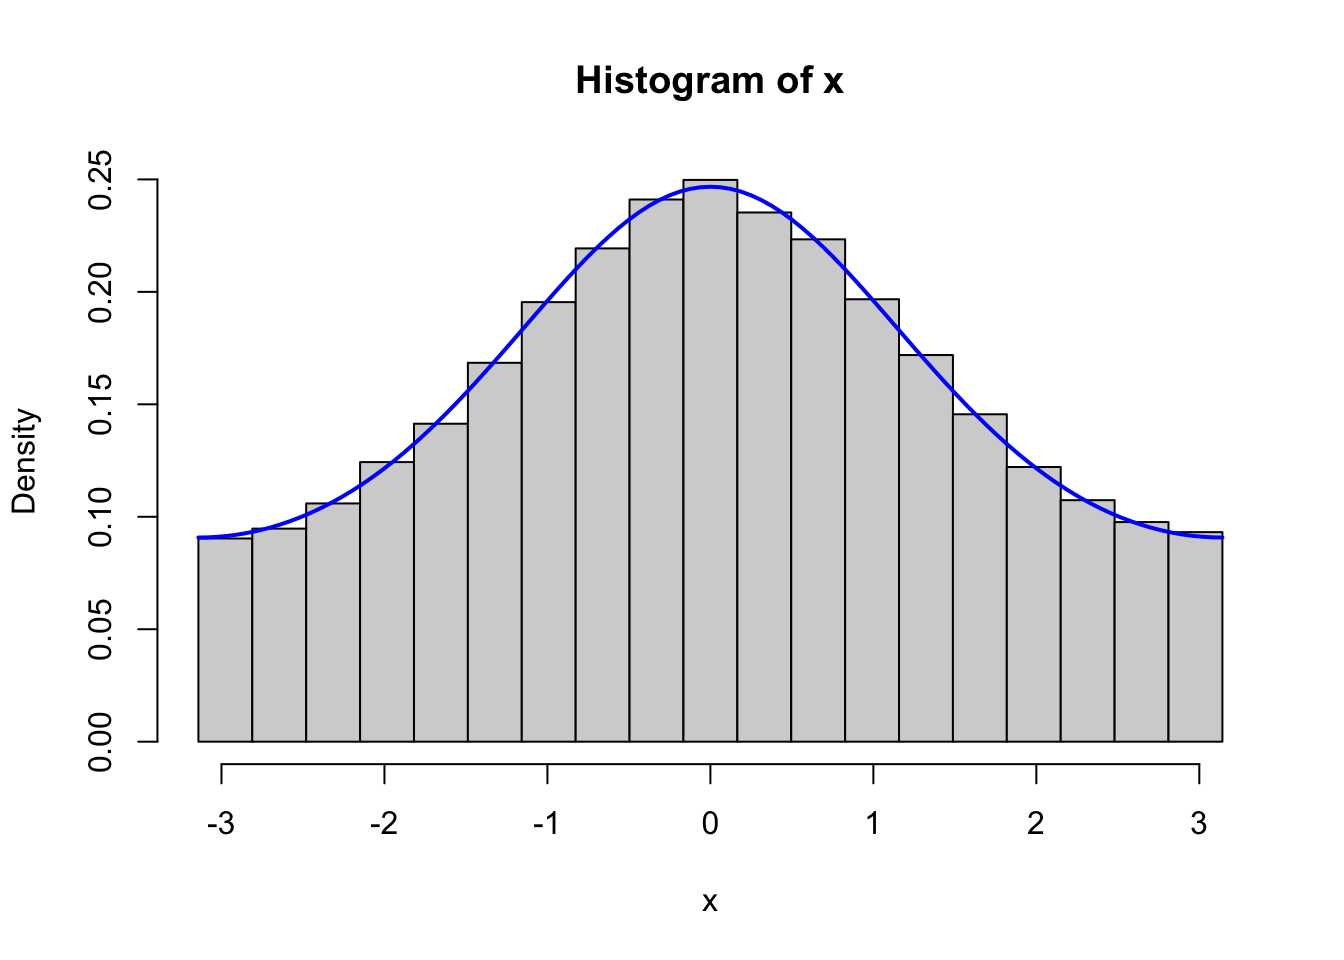 Histograms of 100,000 simulated data points from von Mises distributions with parameters \(\kappa = 0.5\) (left) and \(\kappa = 2\) (right), simulated using the Rcpp implementation (top) and the fully vectorized R implementation (bottom).